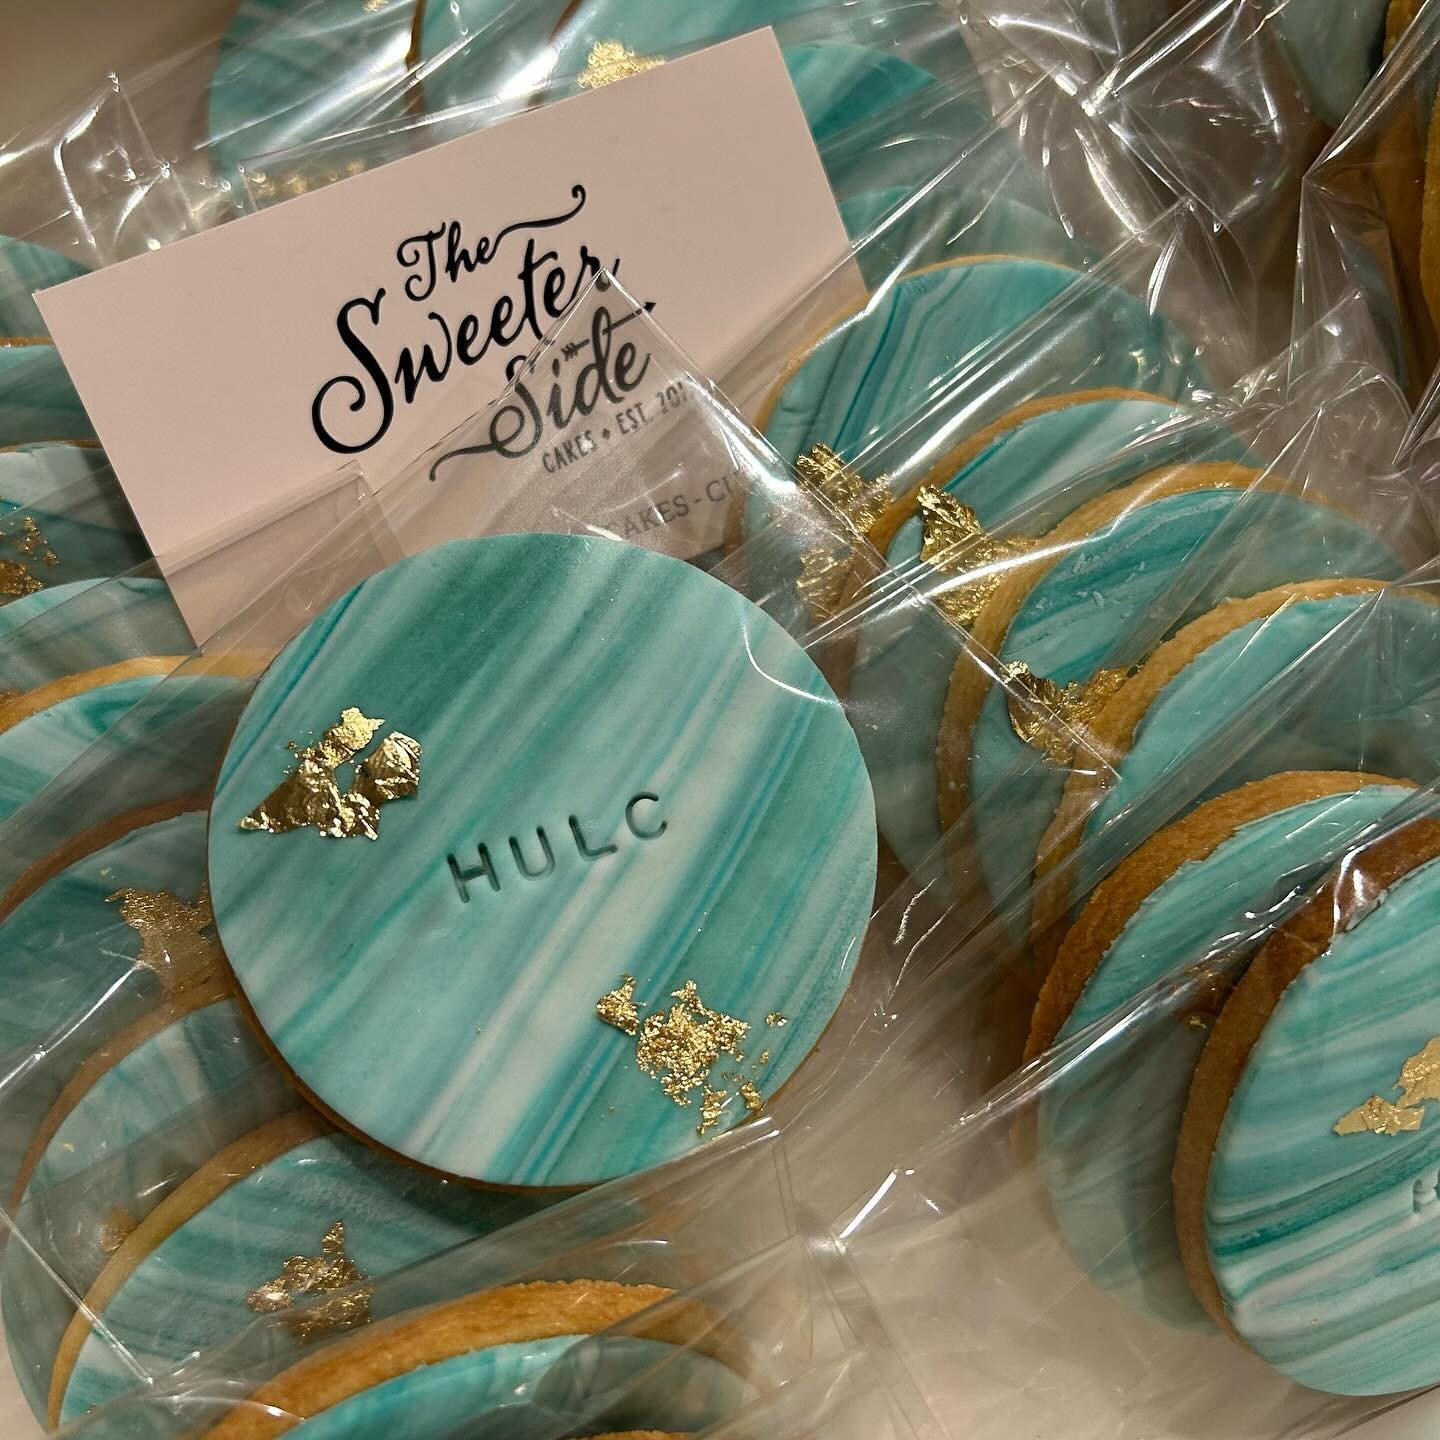 💫 Corporate Cookies for clients at the Hand &amp; Upper Limb Clinic in Perth! 💫 @hulchandtherapy #perthcookies #sugarcookies #sugarcookiesperth #perth #perthbaking #acdn #acdnmember